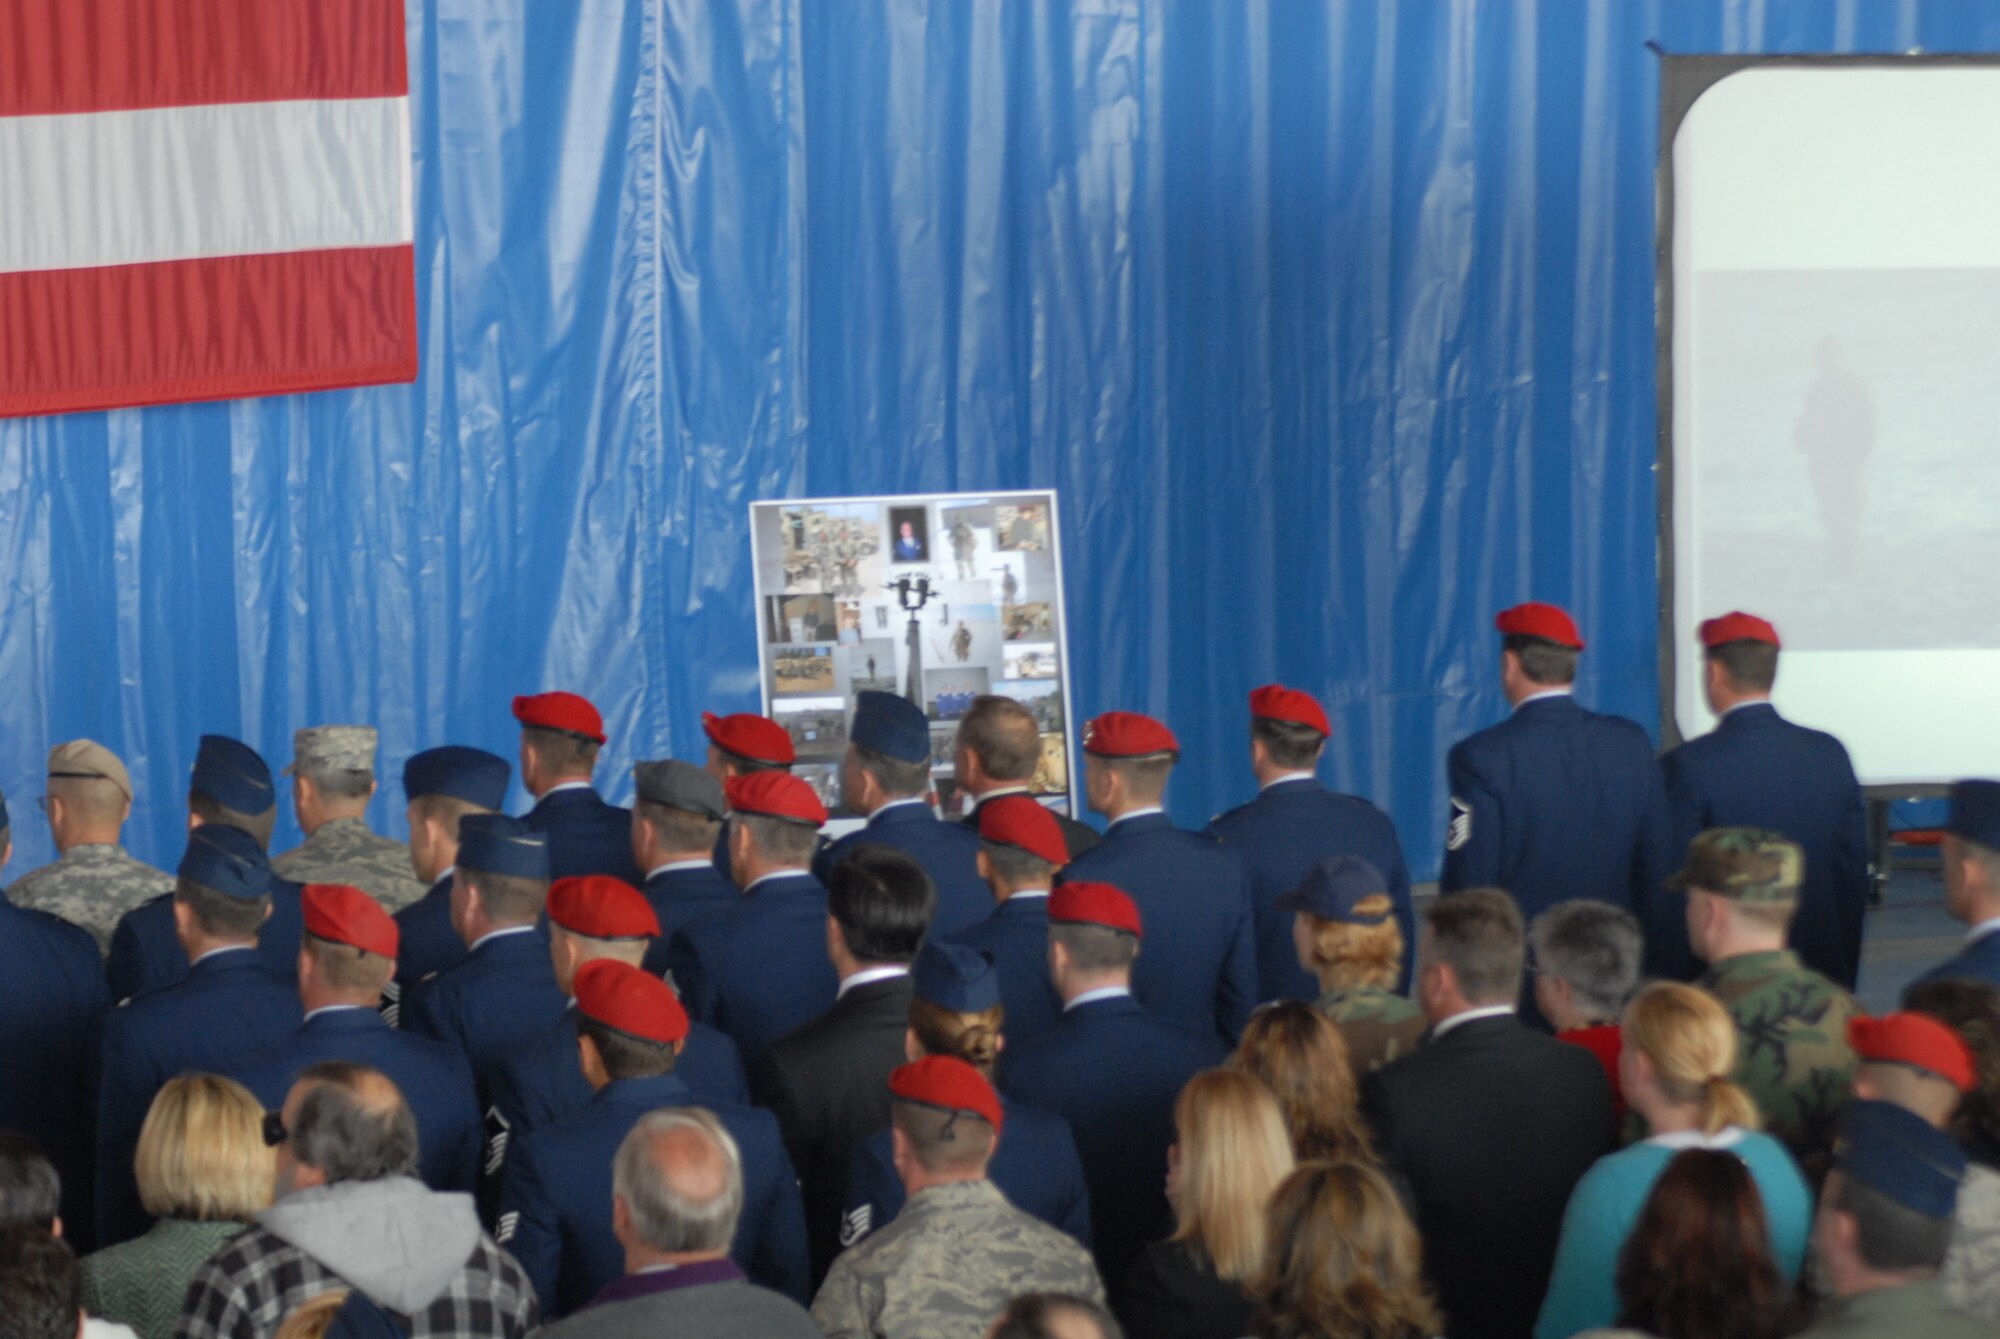 Mourners look on during the memorial ceremony for Tech. Sgt. William Jefferson Jr., 21st Special Tactics Squadron, at Hangar 4 on Pope March 26. Sergeant Jefferson died in support of Operation Enduring Freedom March 22. (U.S. Air Force Photo by 2nd Lt. Chris Hoyler)